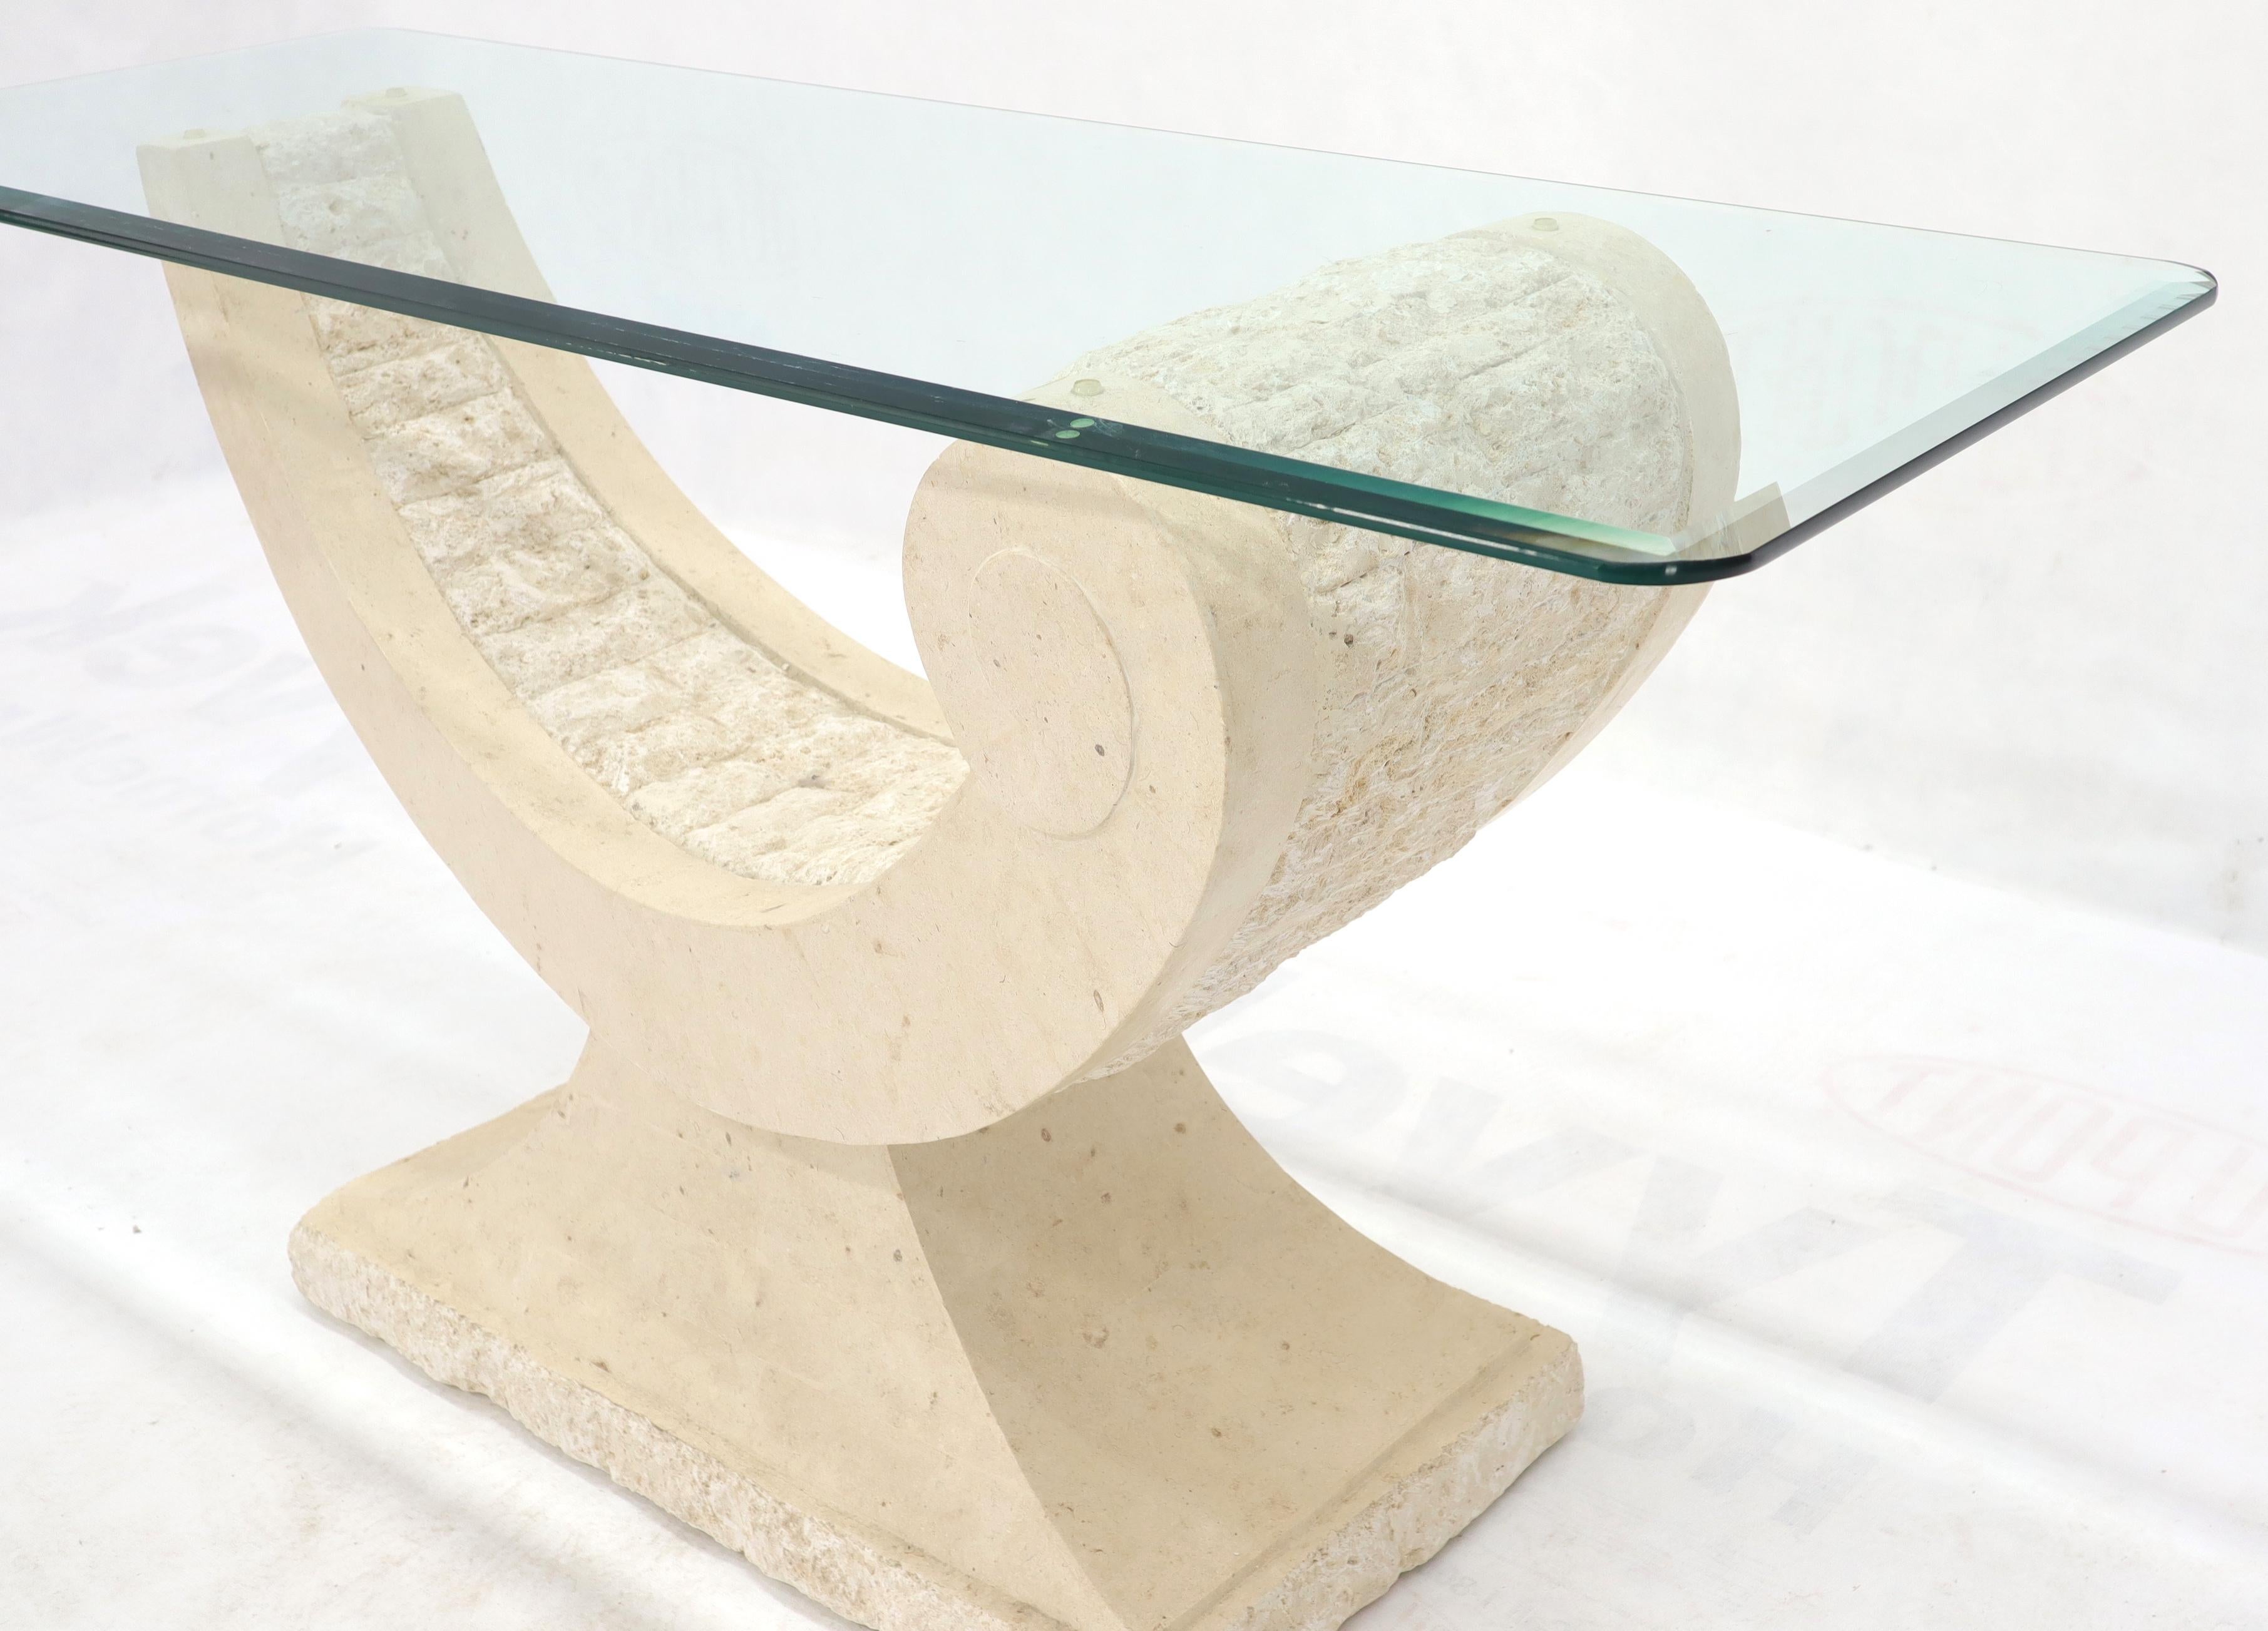 Tessellated Stone Organic Shape Base Rectangular Sofa Console Table In Excellent Condition For Sale In Rockaway, NJ